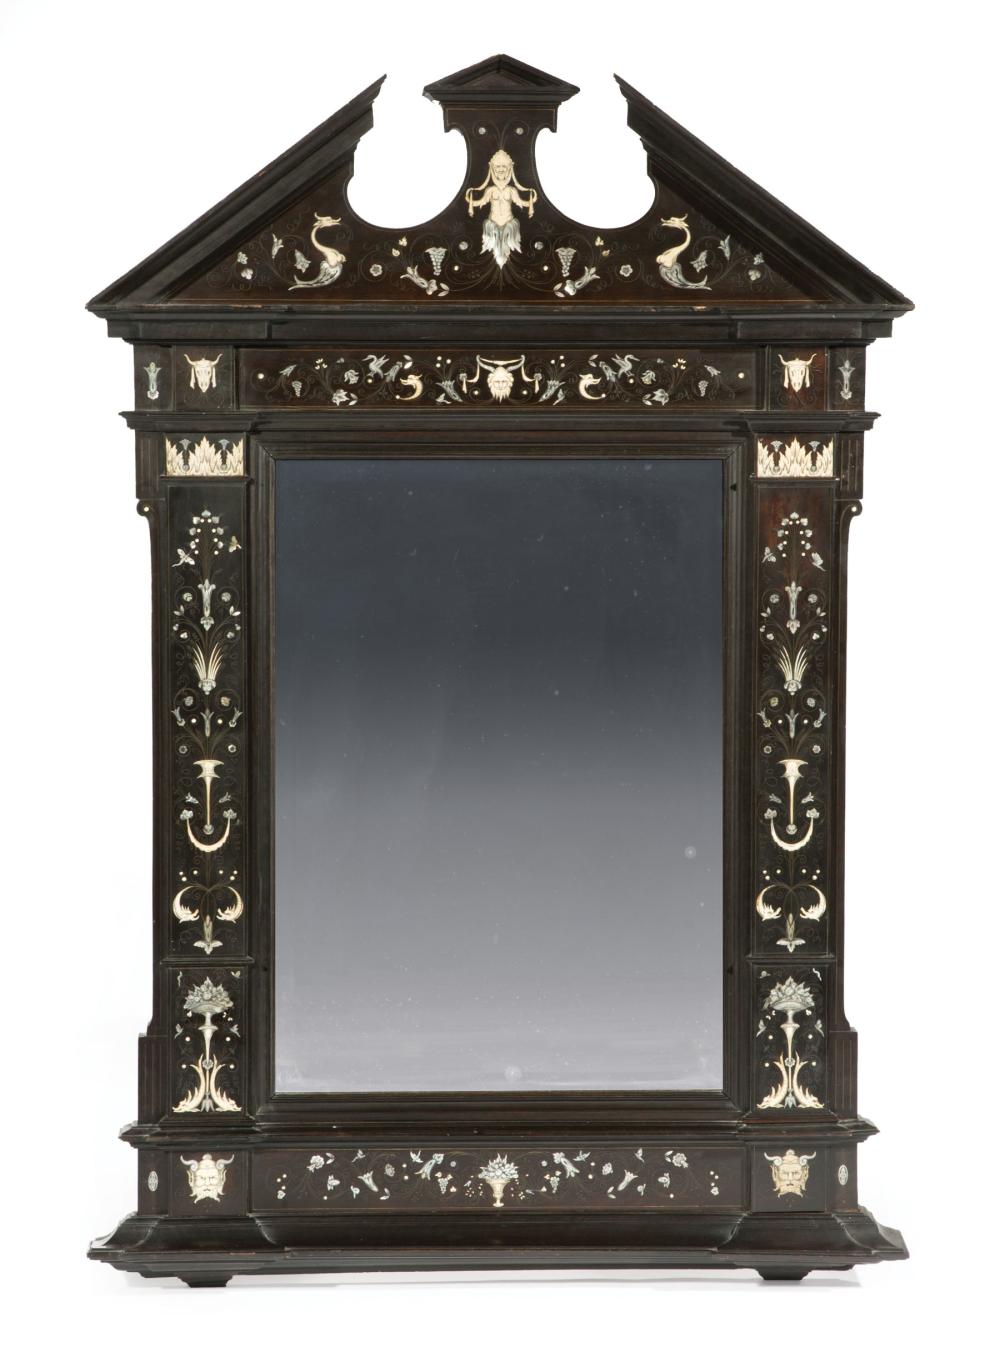 INLAID AND EBONIZED MIRRORContinental